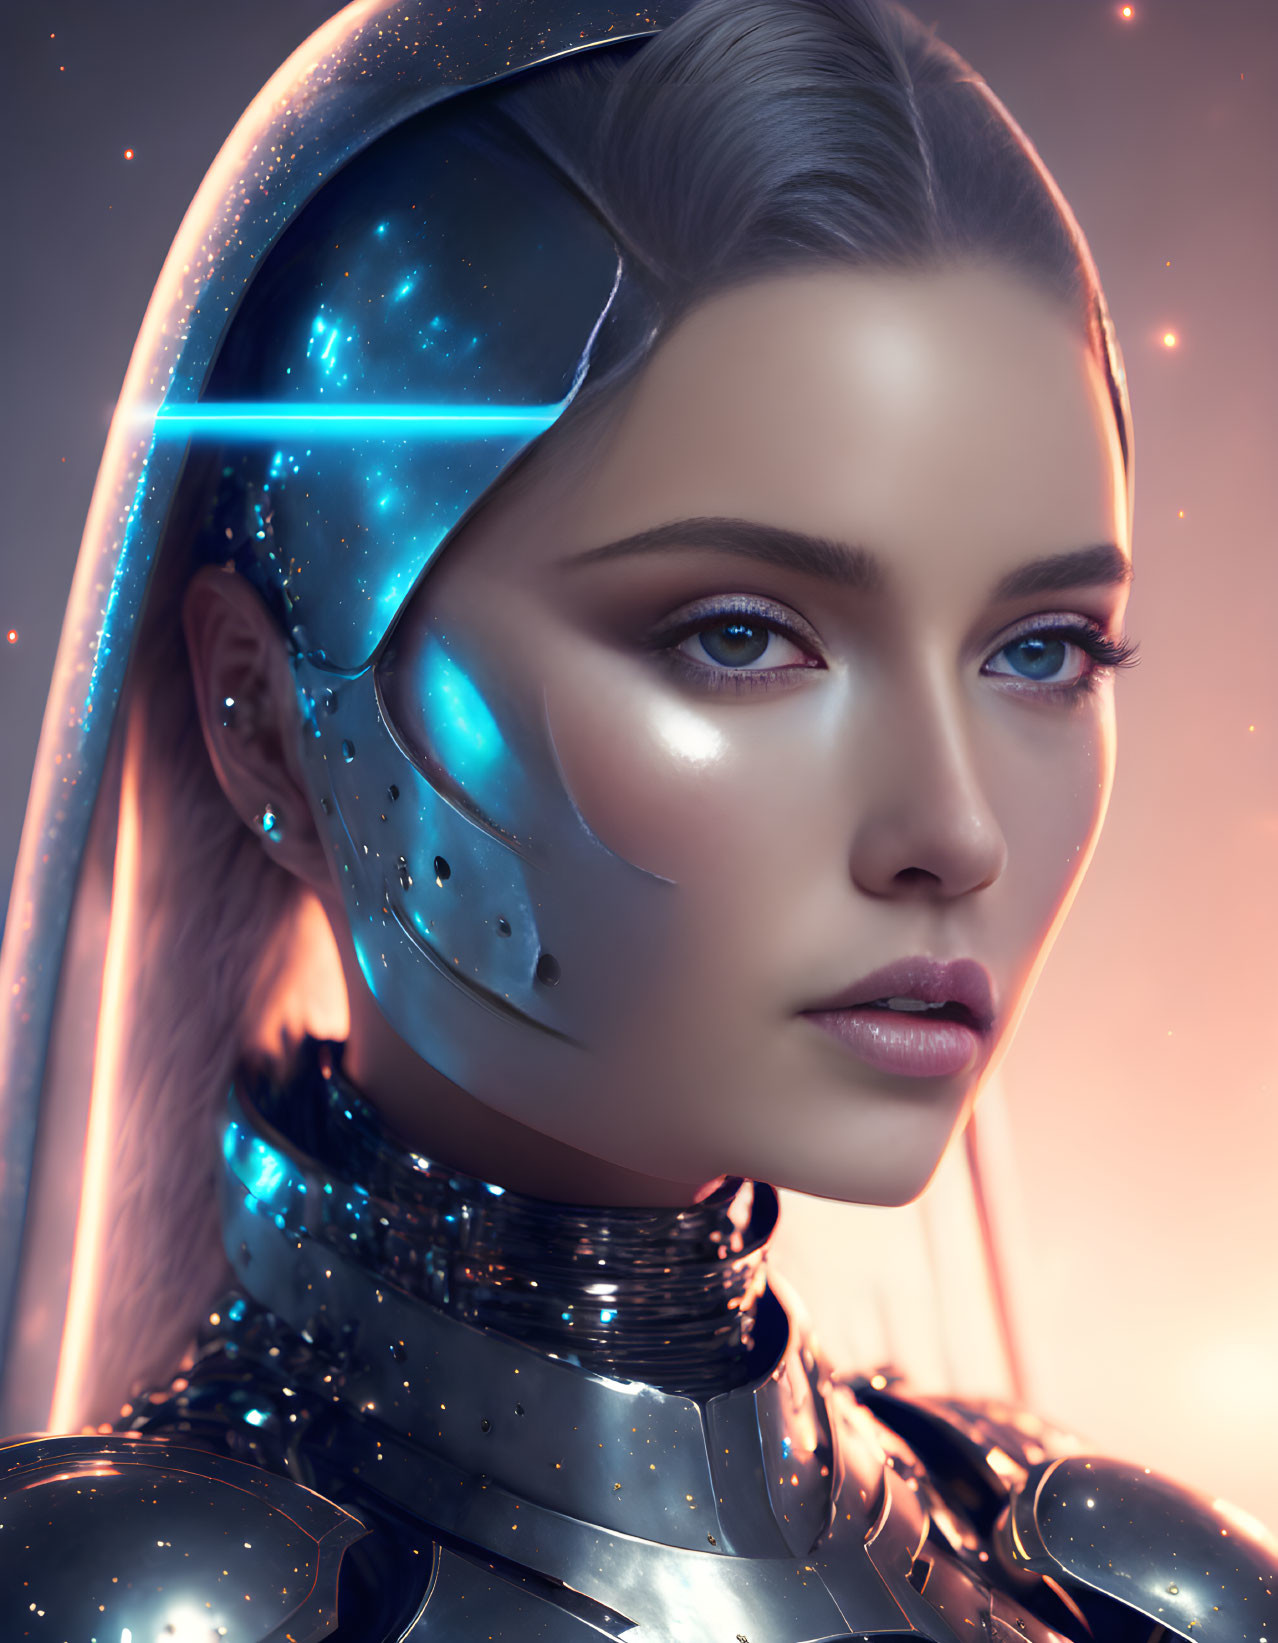 Futuristic woman with silver helmet and blue visor in metallic armor